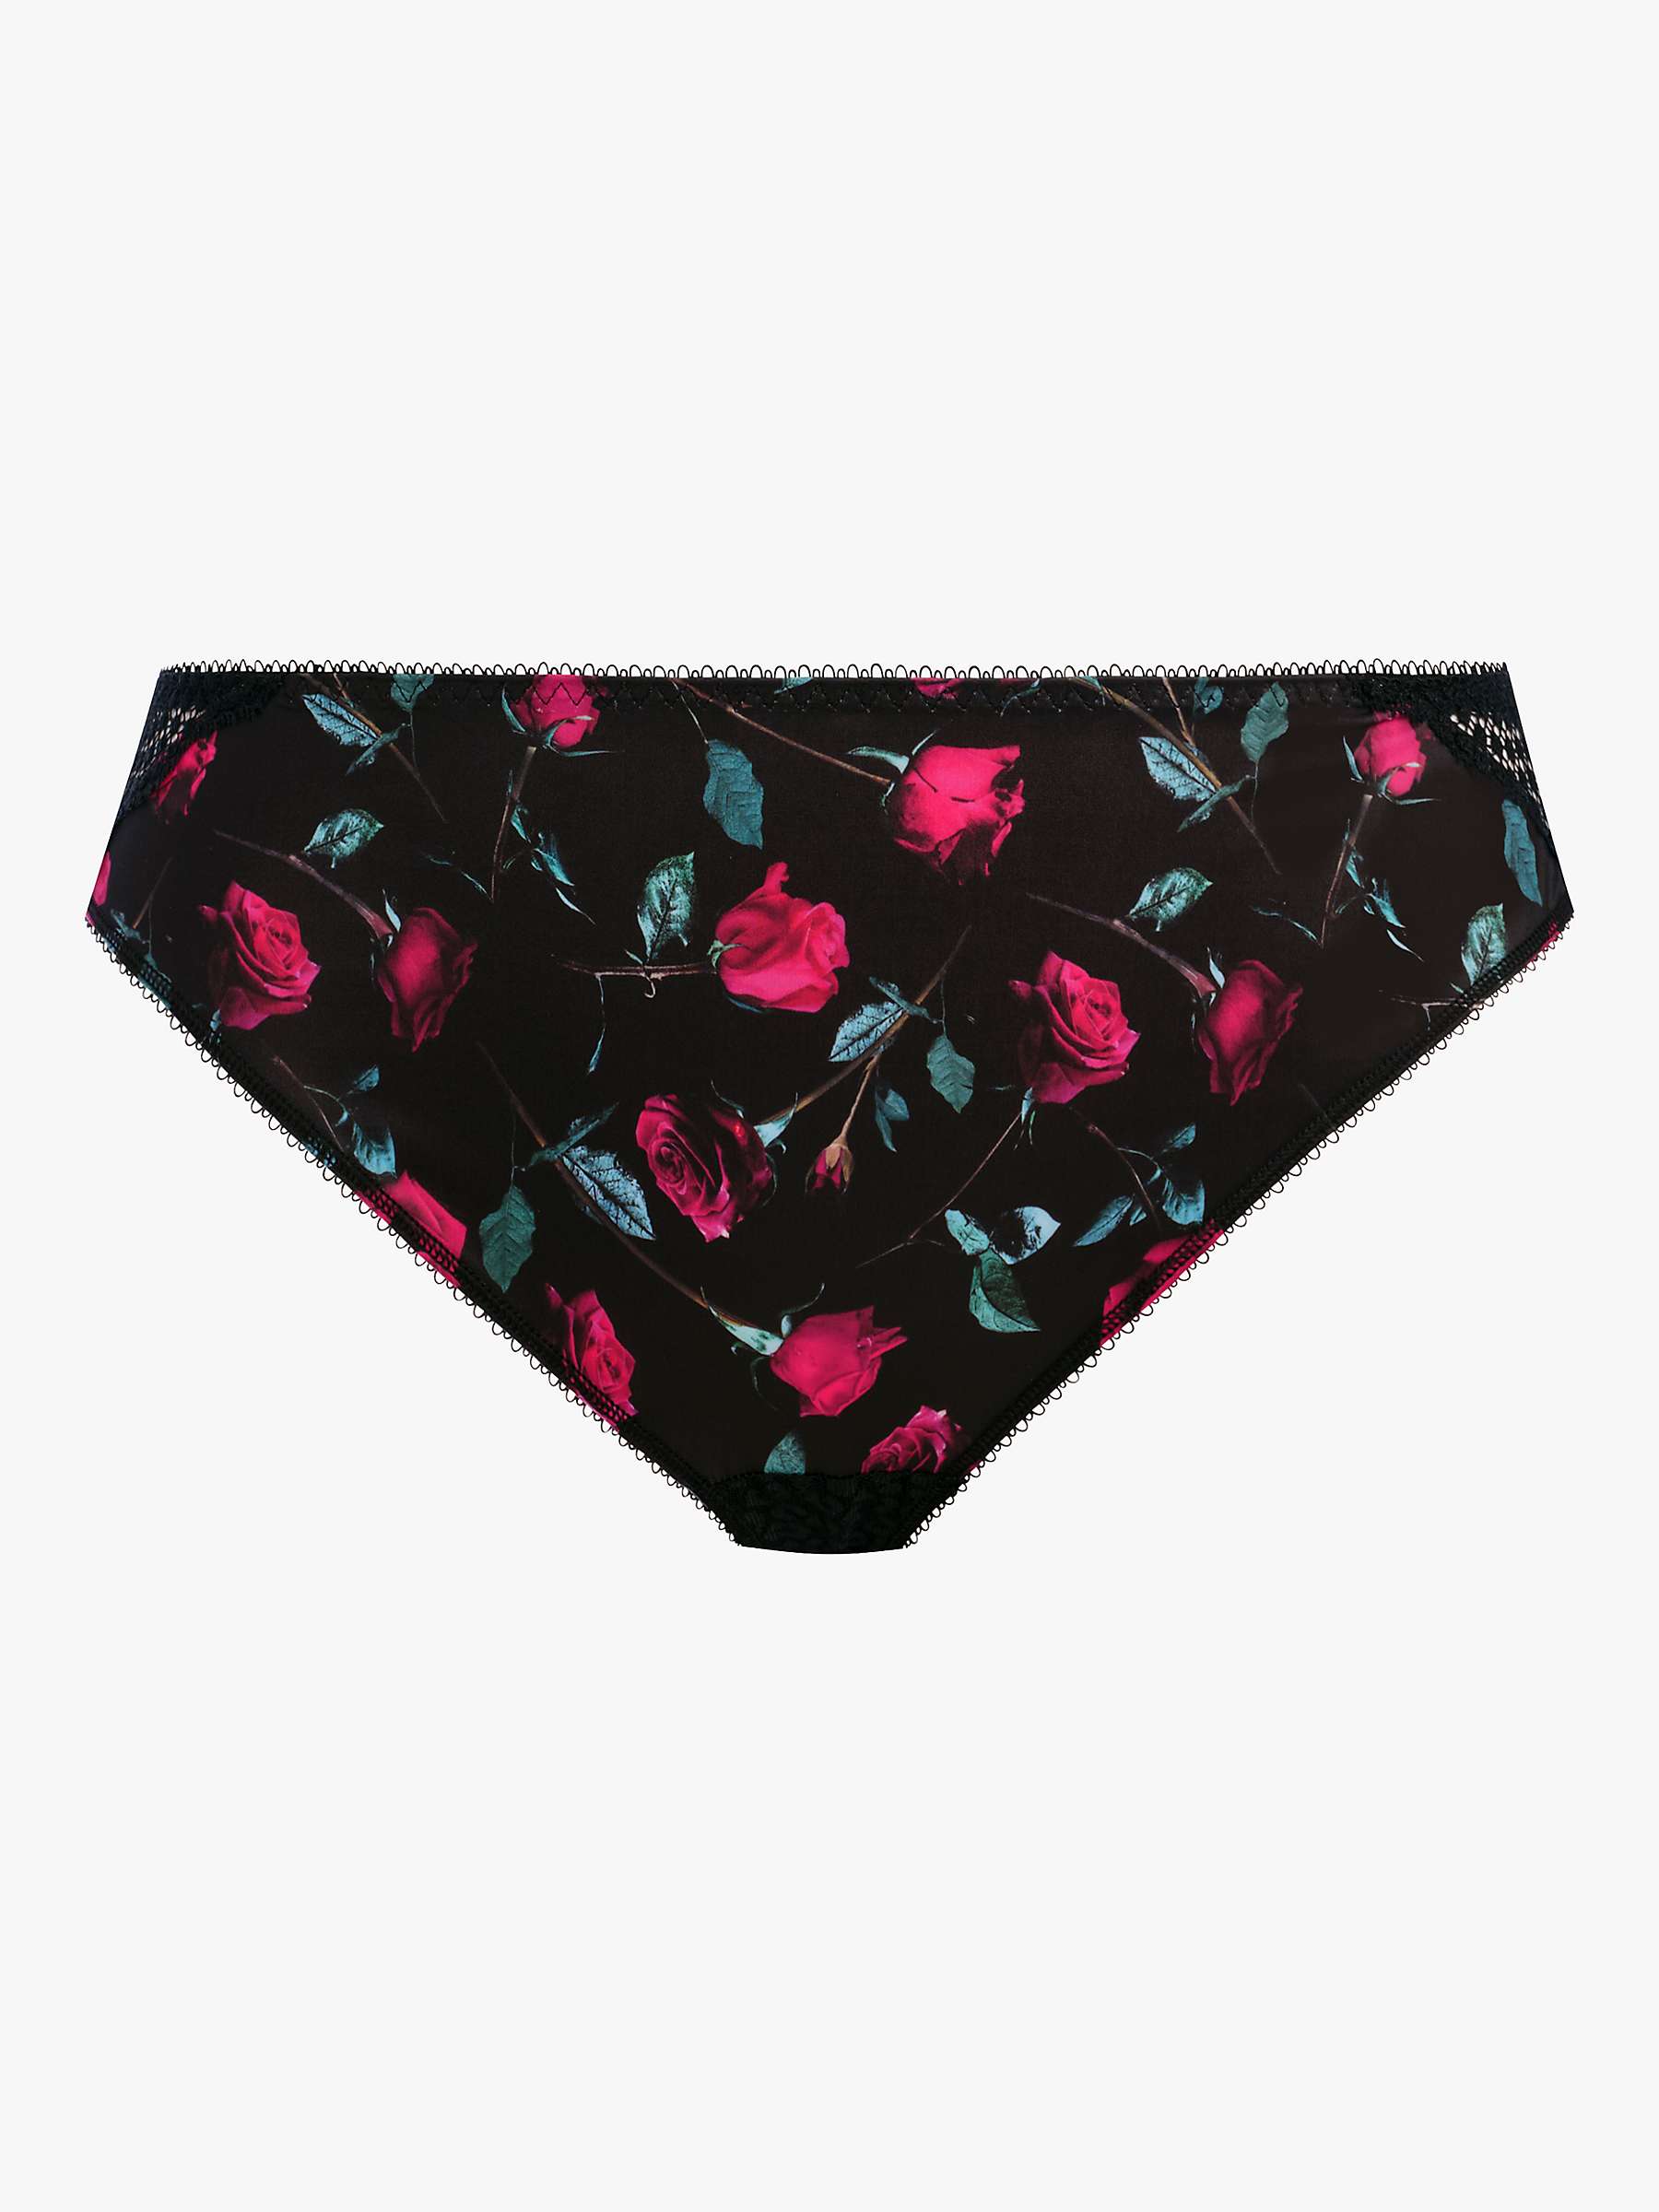 Buy Elomi Lucie Stretch Lace Panel Briefs, Rock N Rose Online at johnlewis.com